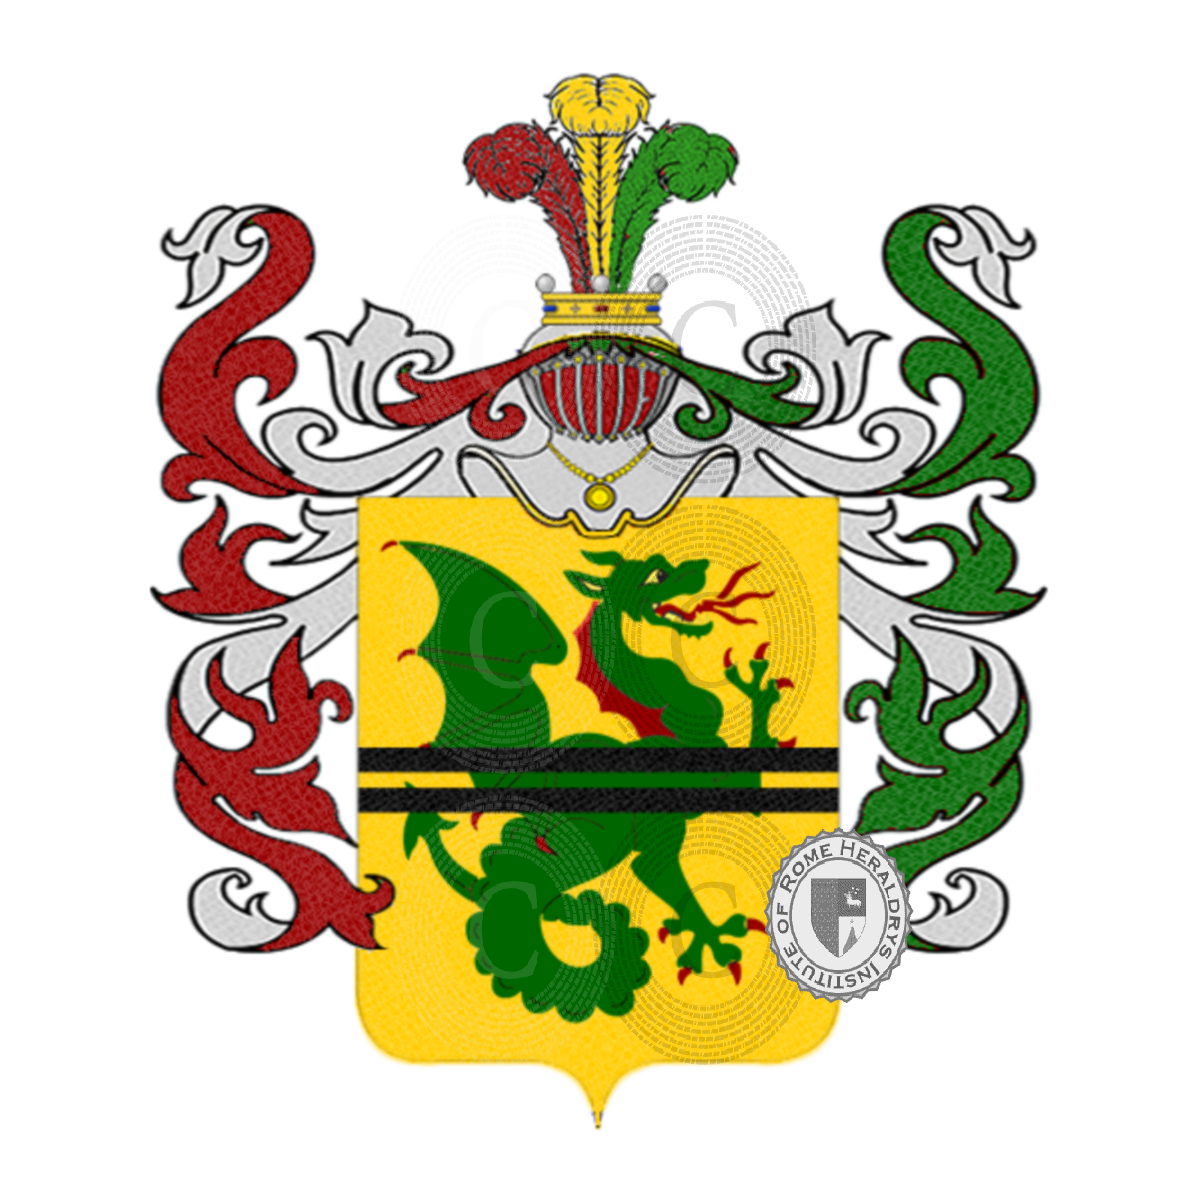 Coat of arms of familygarimanno    